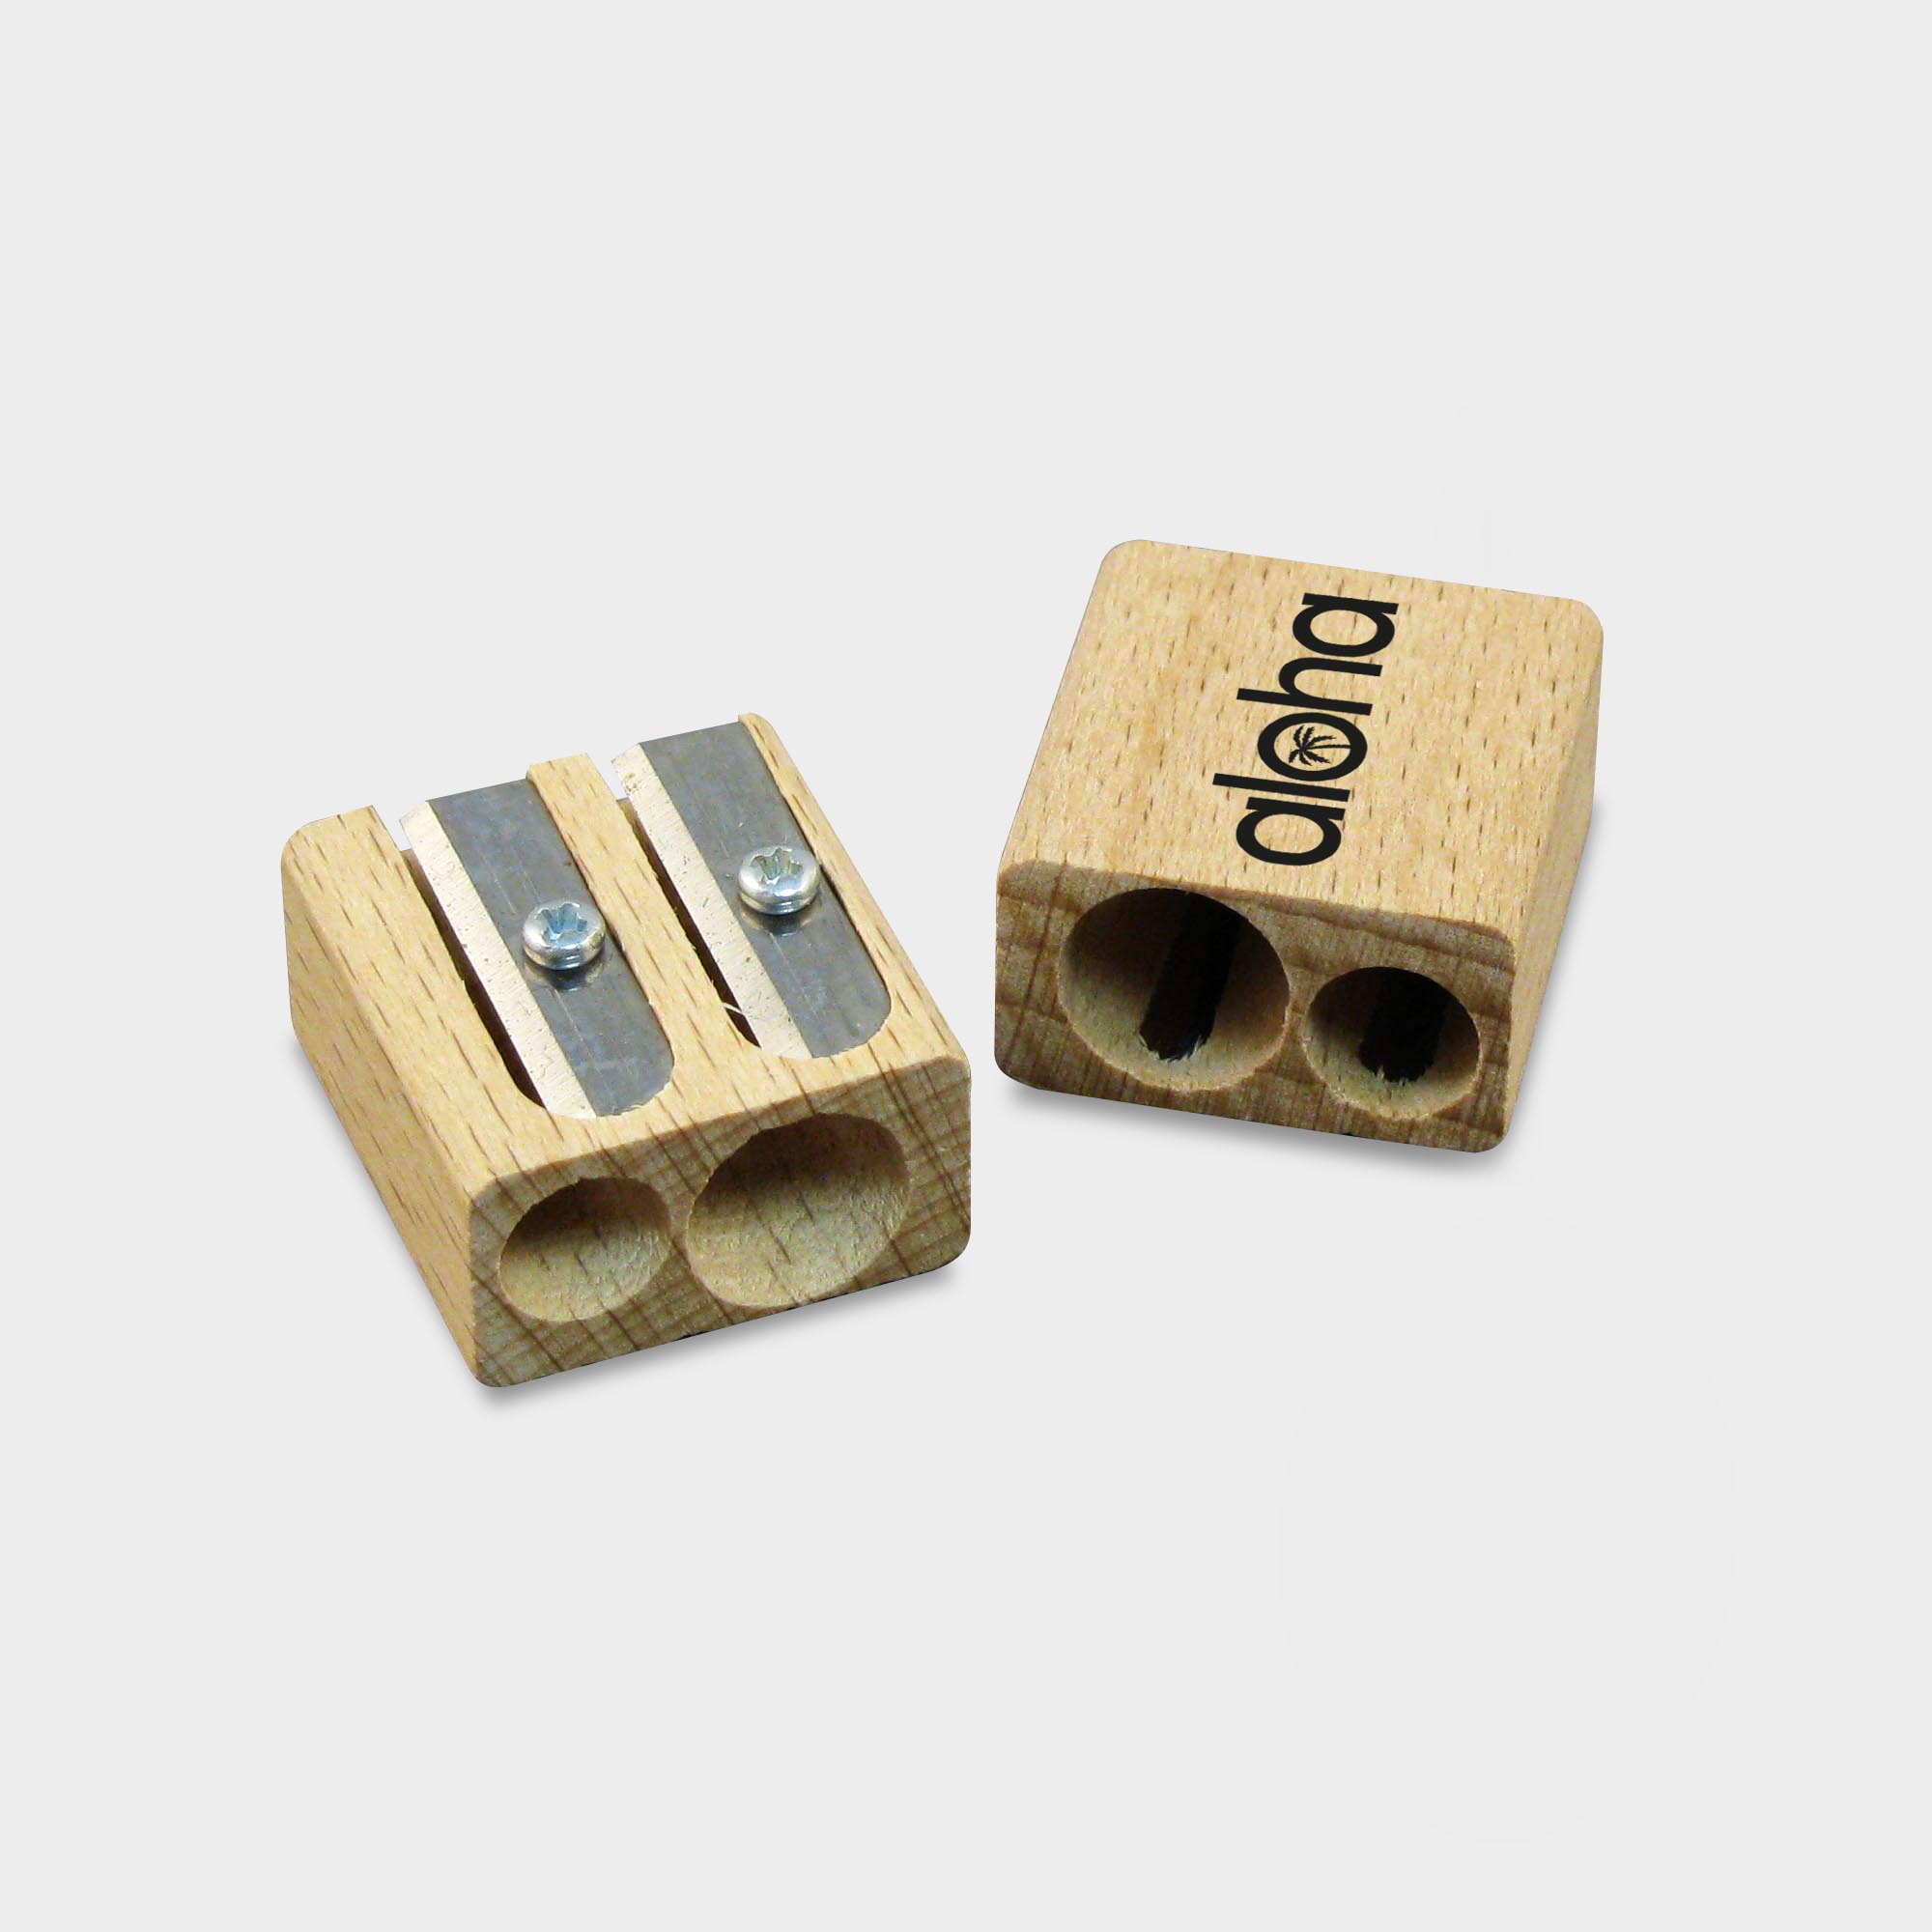 The Green & Good Double Pencil Sharpener is made from sustainable wood. Comes with a high-quality blade for long-lasting sharpening. Made in Germany from sustainable beech wood.